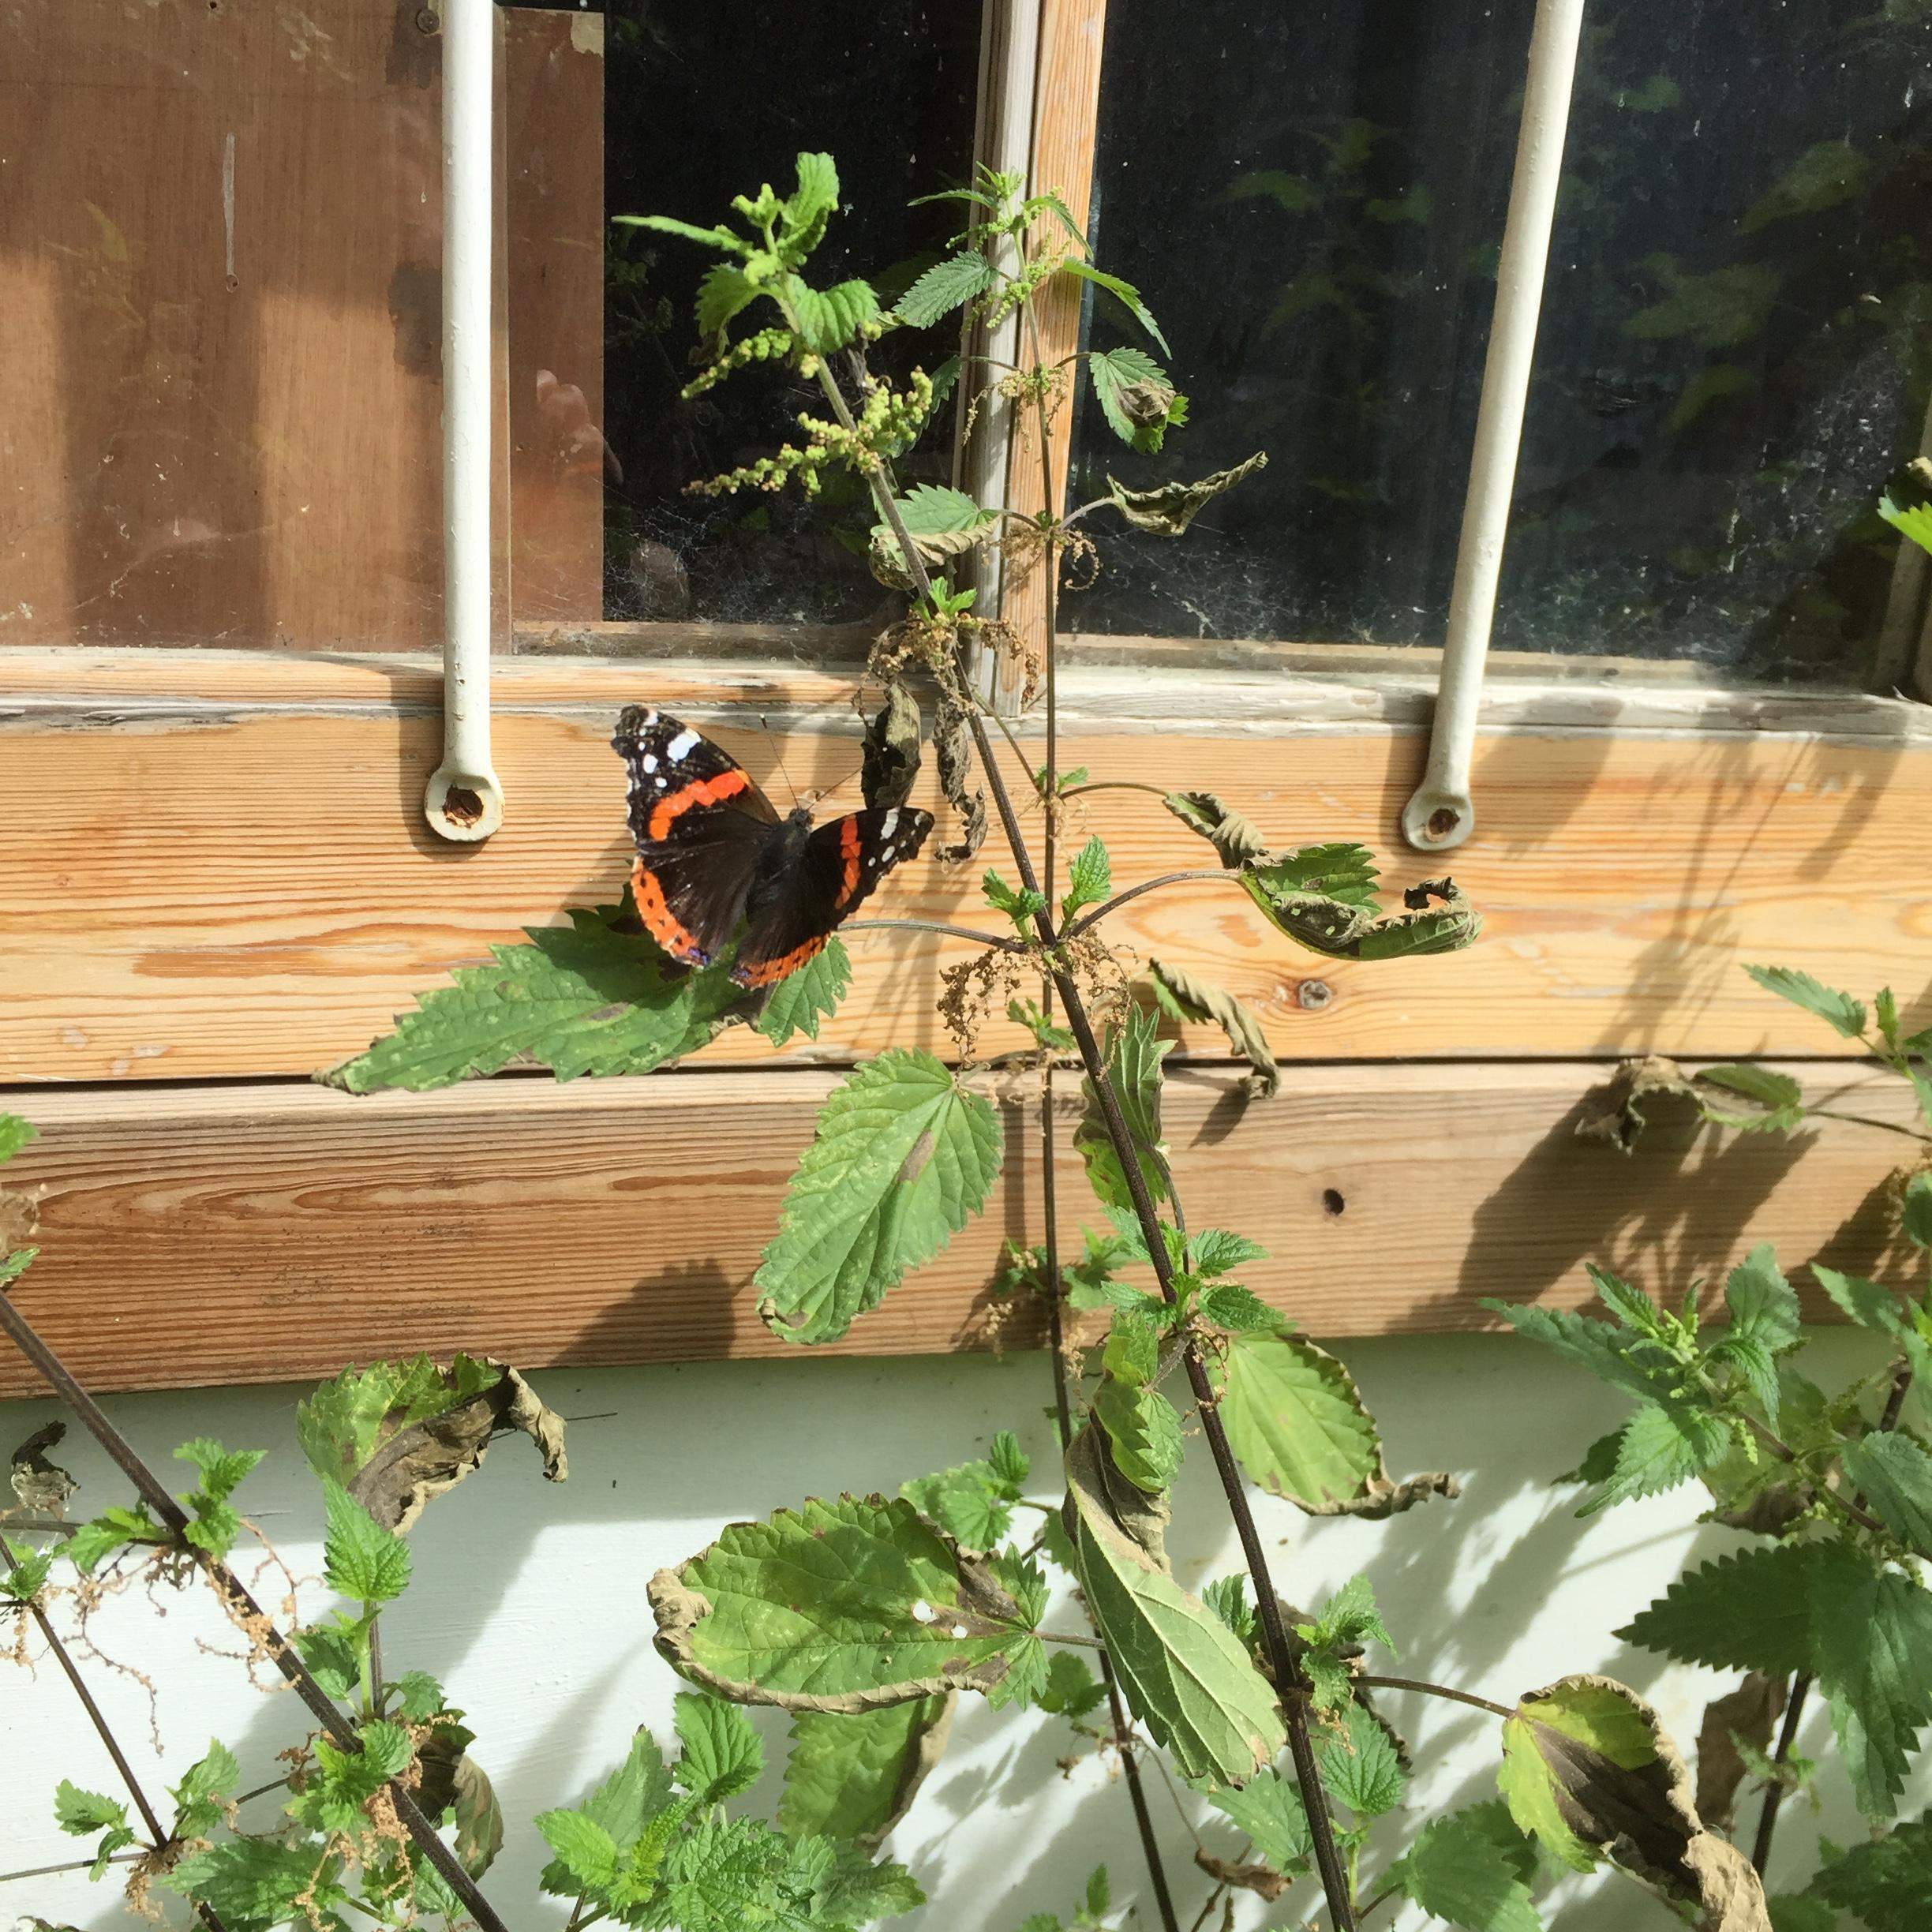 Another Red Admiral breeding on nettles planted in Waste Bins